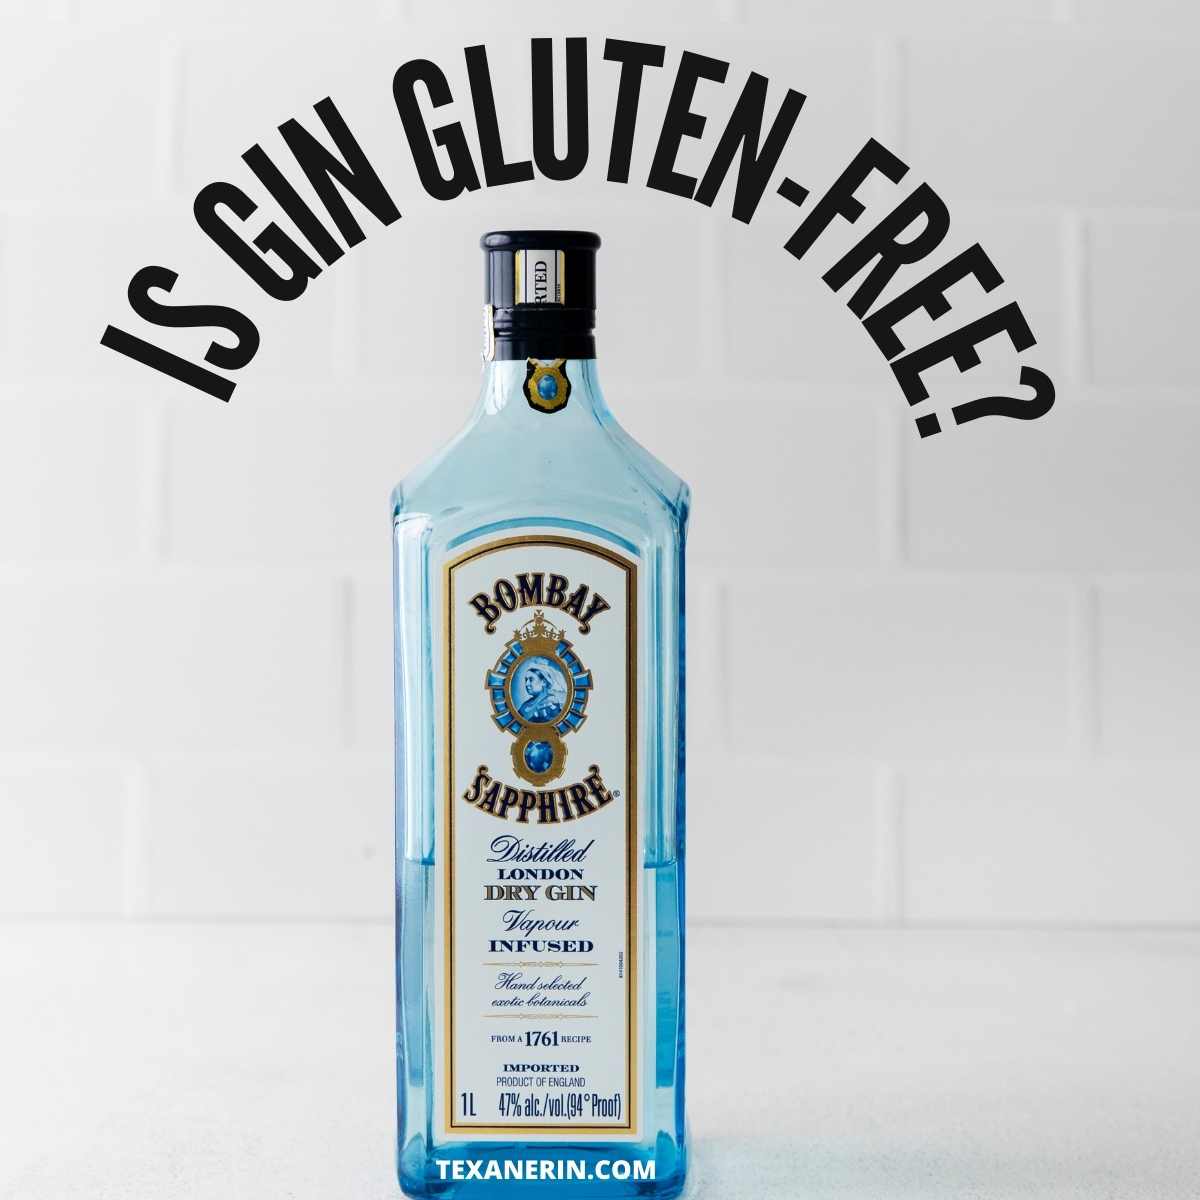 Is Beefeater Gin Gluten Free